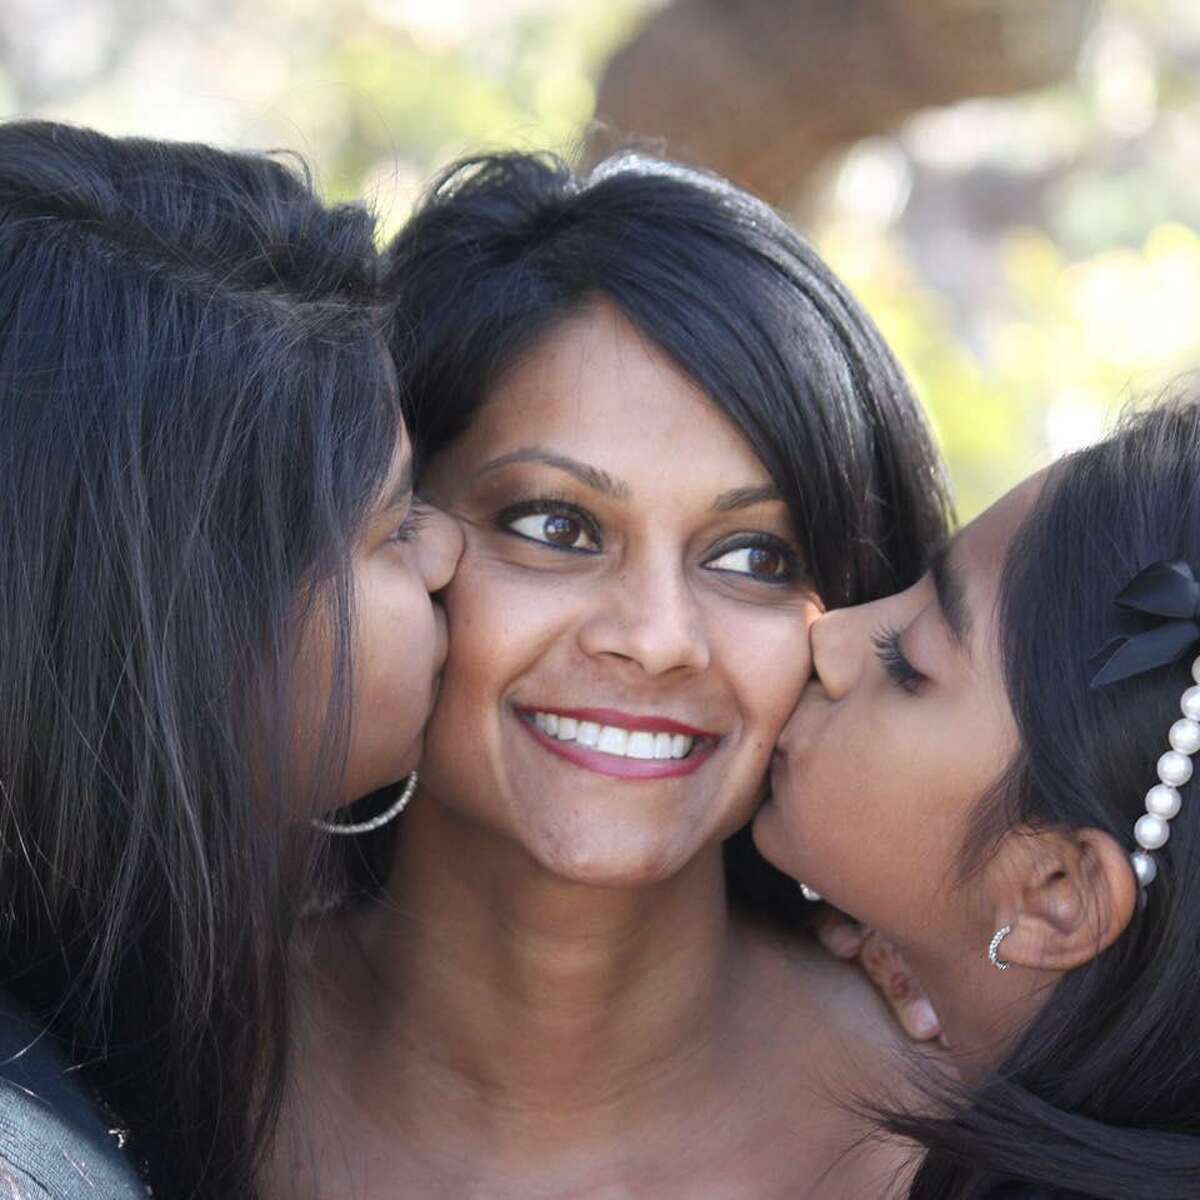 A San Antonio single mom and CNN Hero Mona Patel gets appreciative kisses from her two daughters before embarking on a special trip to New York where she'll be honored on a national TV special Sunday night.